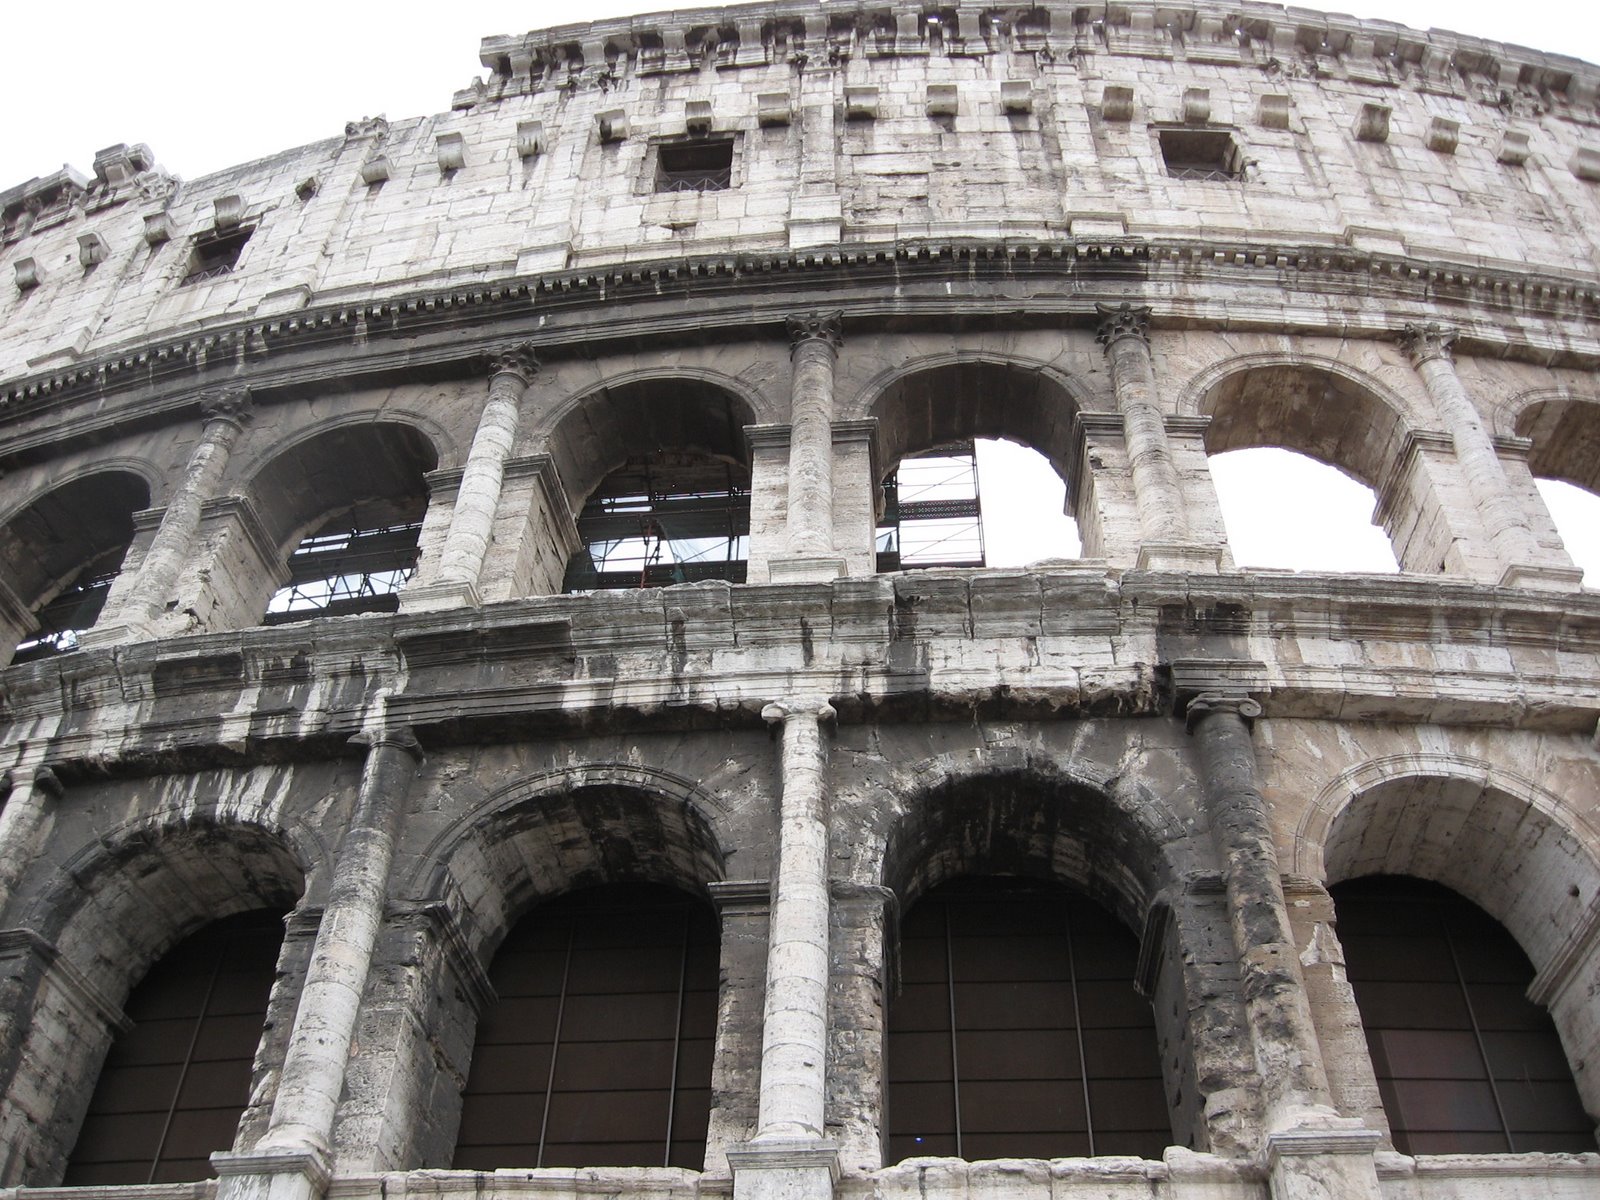 [looking+up+at+the+Coliseum.jpg]